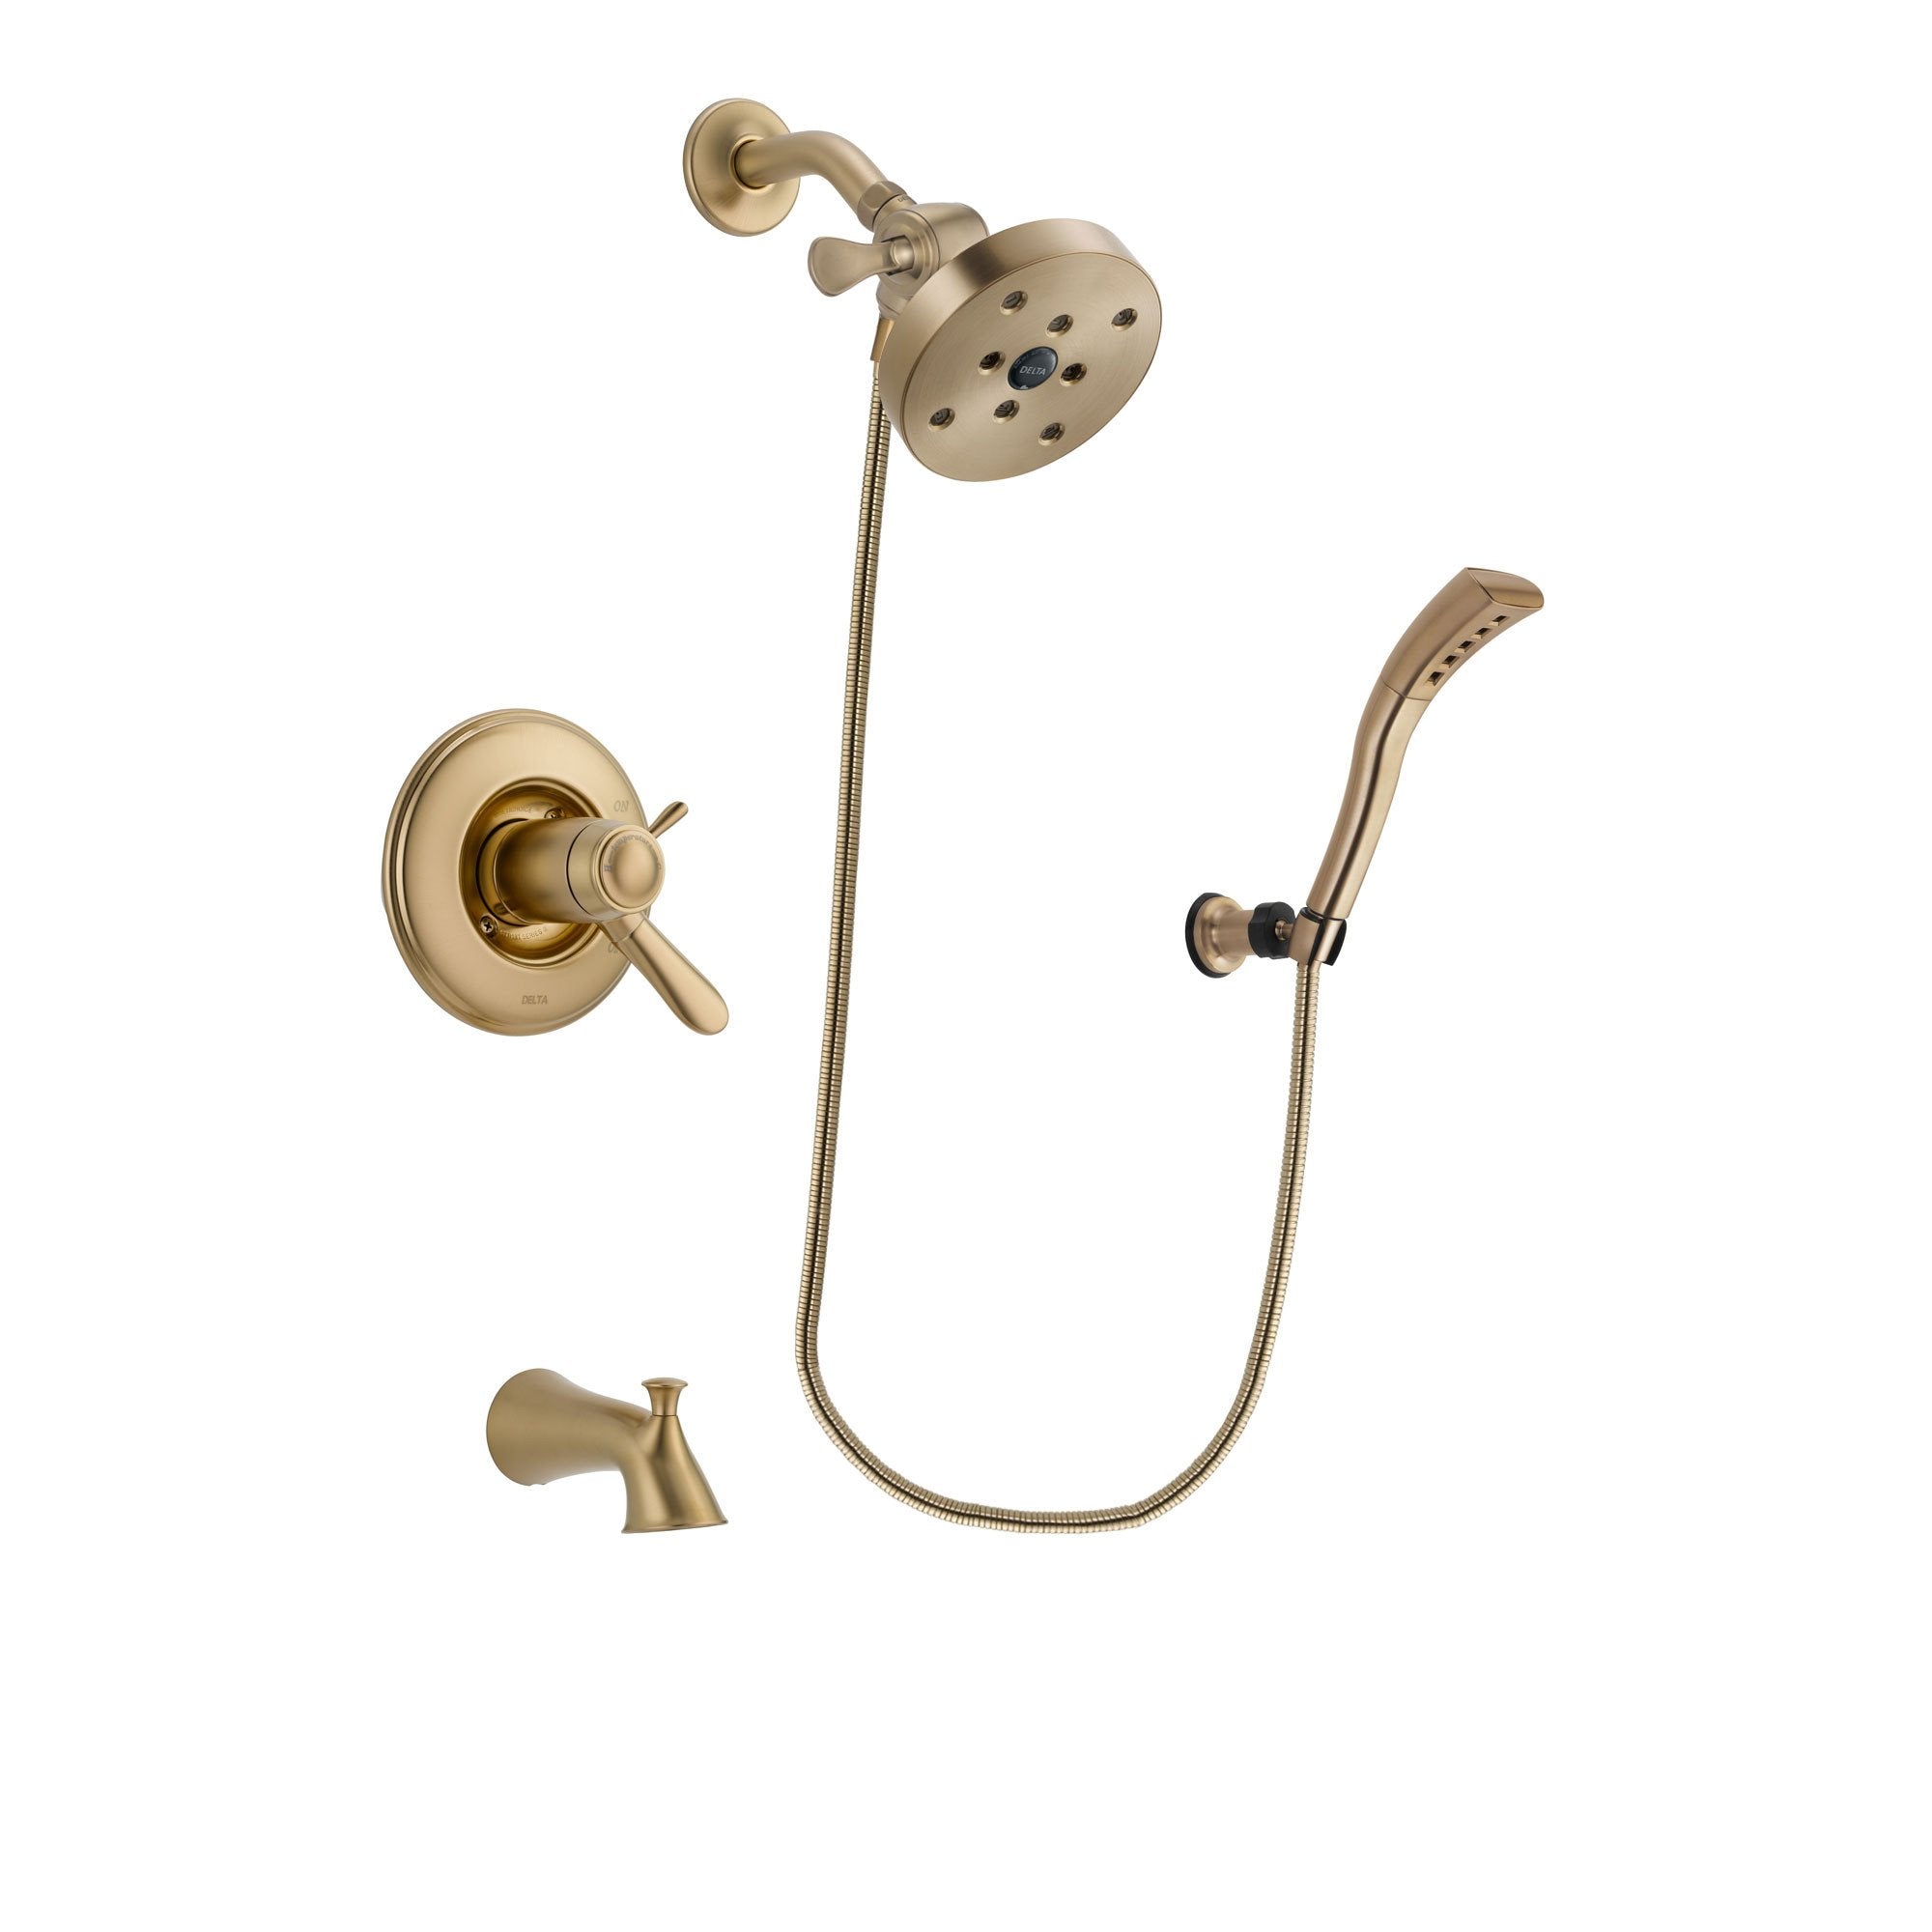 Delta Lahara Champagne Bronze Finish Thermostatic Tub and Shower Faucet System Package with 5-1/2 inch Showerhead and Modern Wall Mount Personal Handheld Shower Spray Includes Rough-in Valve and Tub Spout DSP3707V